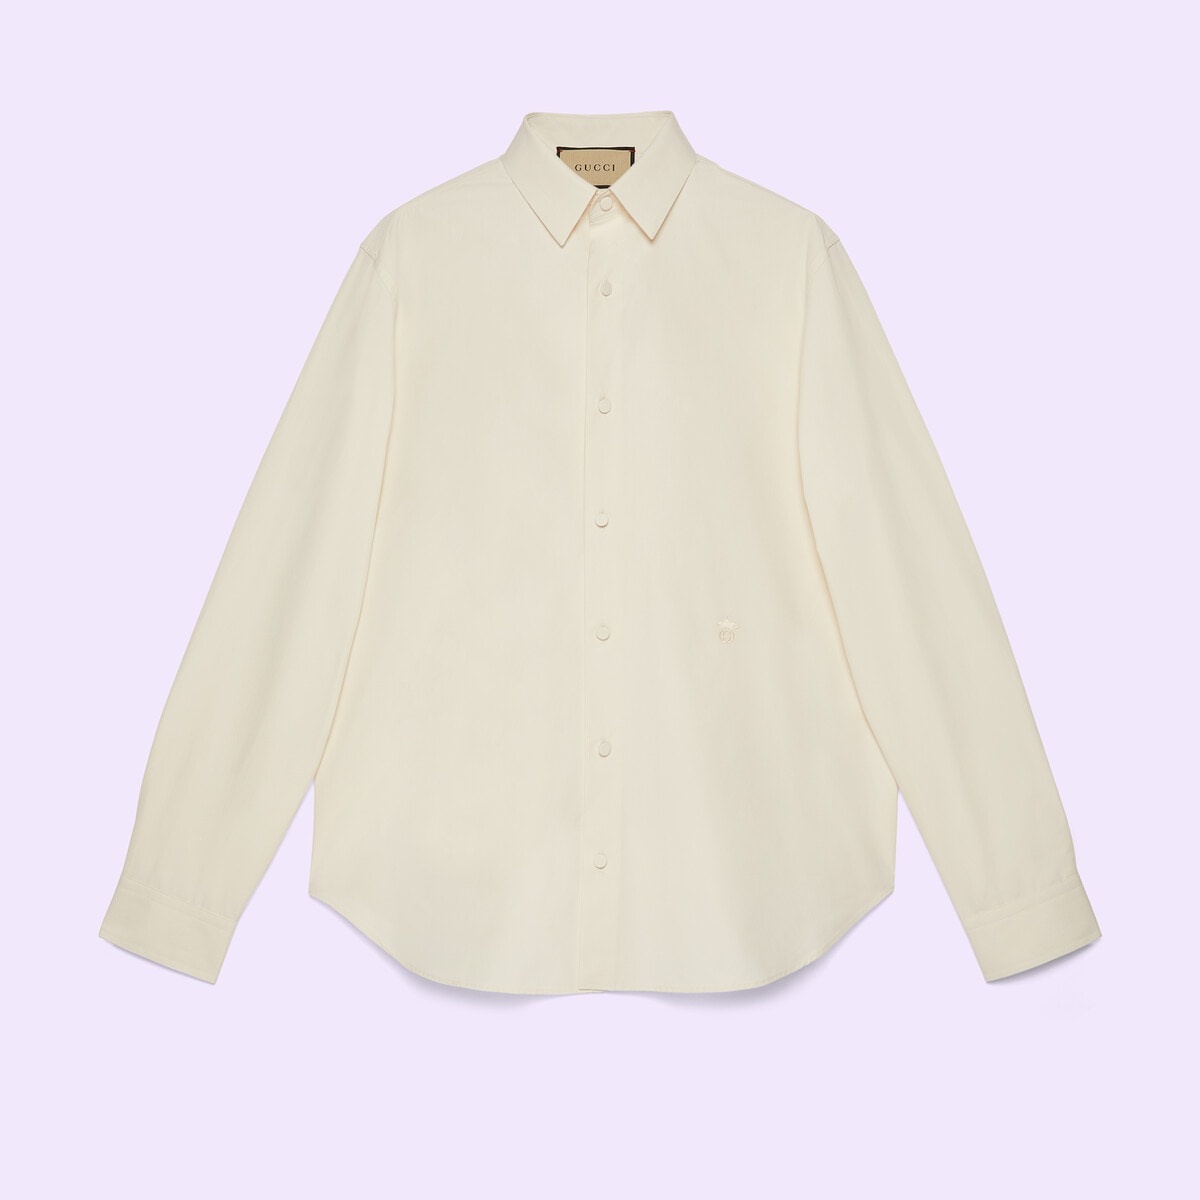 Cotton poplin shirt with embroidery - 1